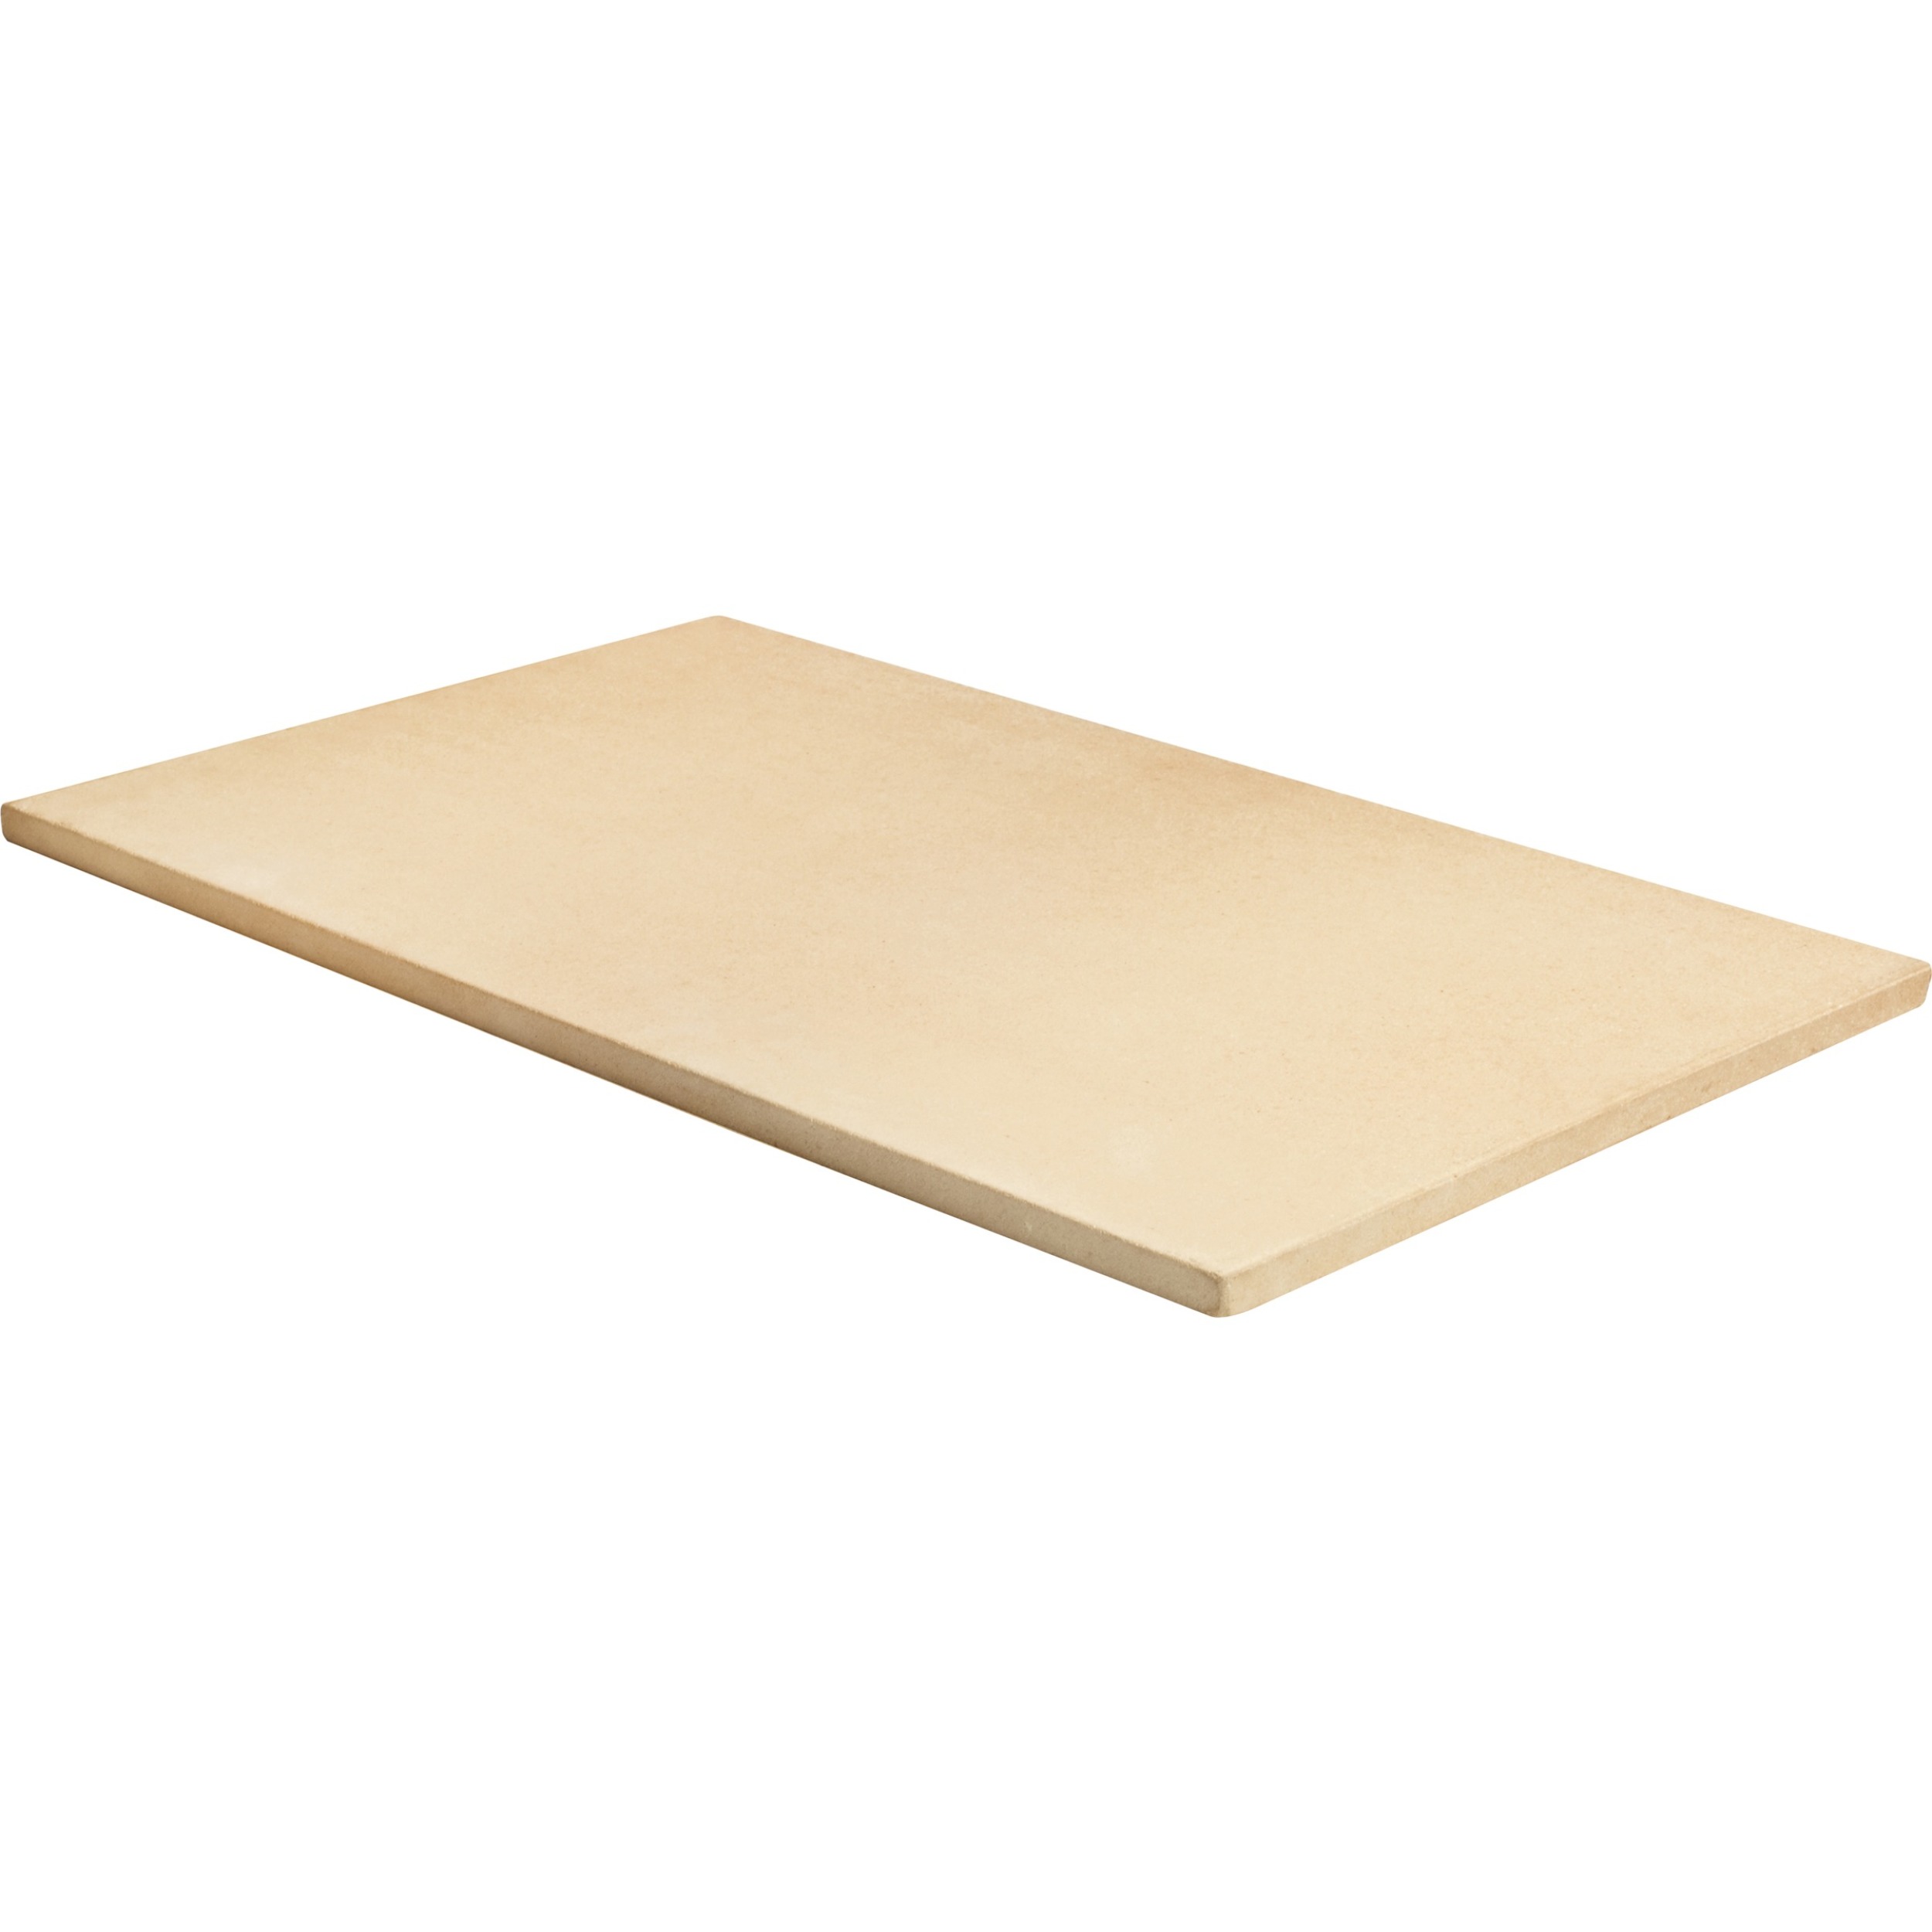 Pizzacraft Rectangular Cordierite Baking/Pizza Stone for Oven or Grill, 20"x13.5" - PC0102 - image 3 of 5